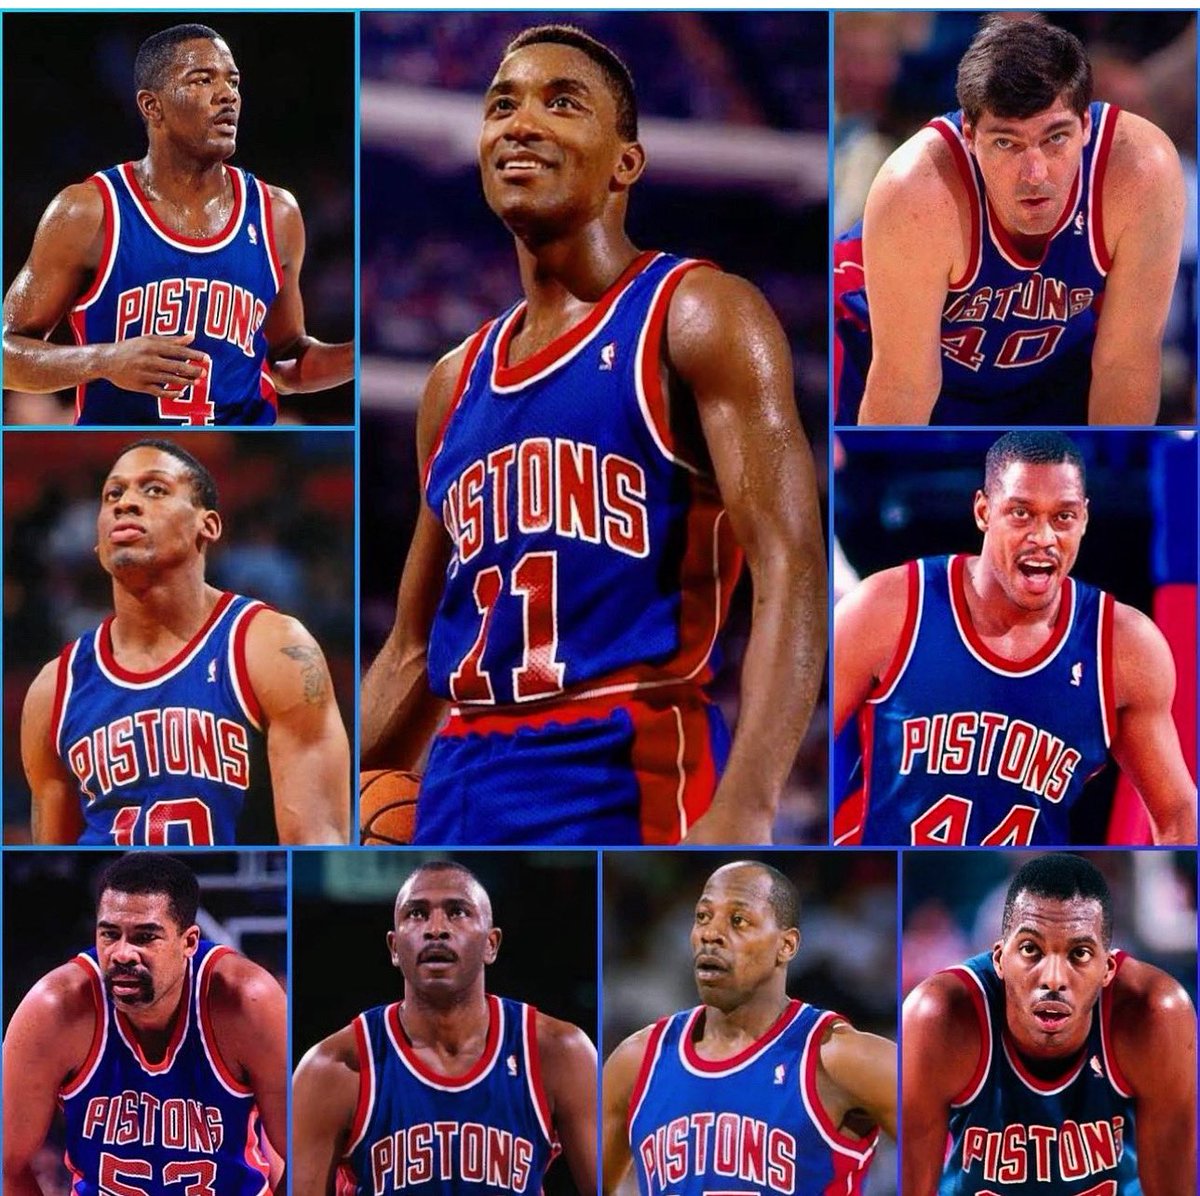 Let it be known, One of the best defensive teams ever.